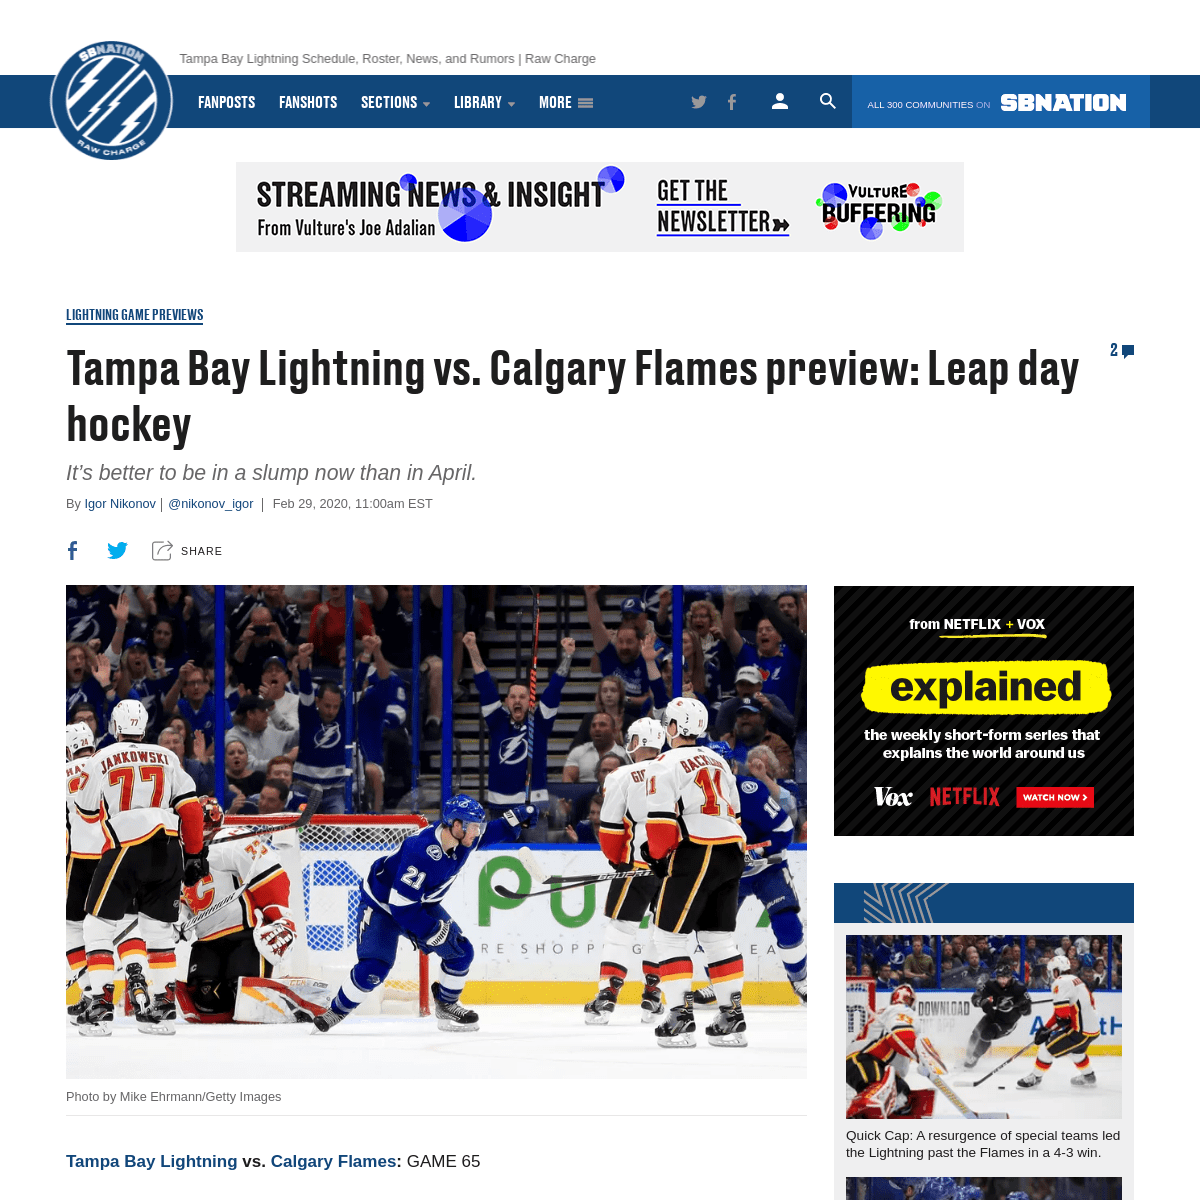 A complete backup of www.rawcharge.com/2020/2/29/21158931/tampa-bay-lightning-vs-calgary-flames-preview-lines-how-to-watch-nhl-t